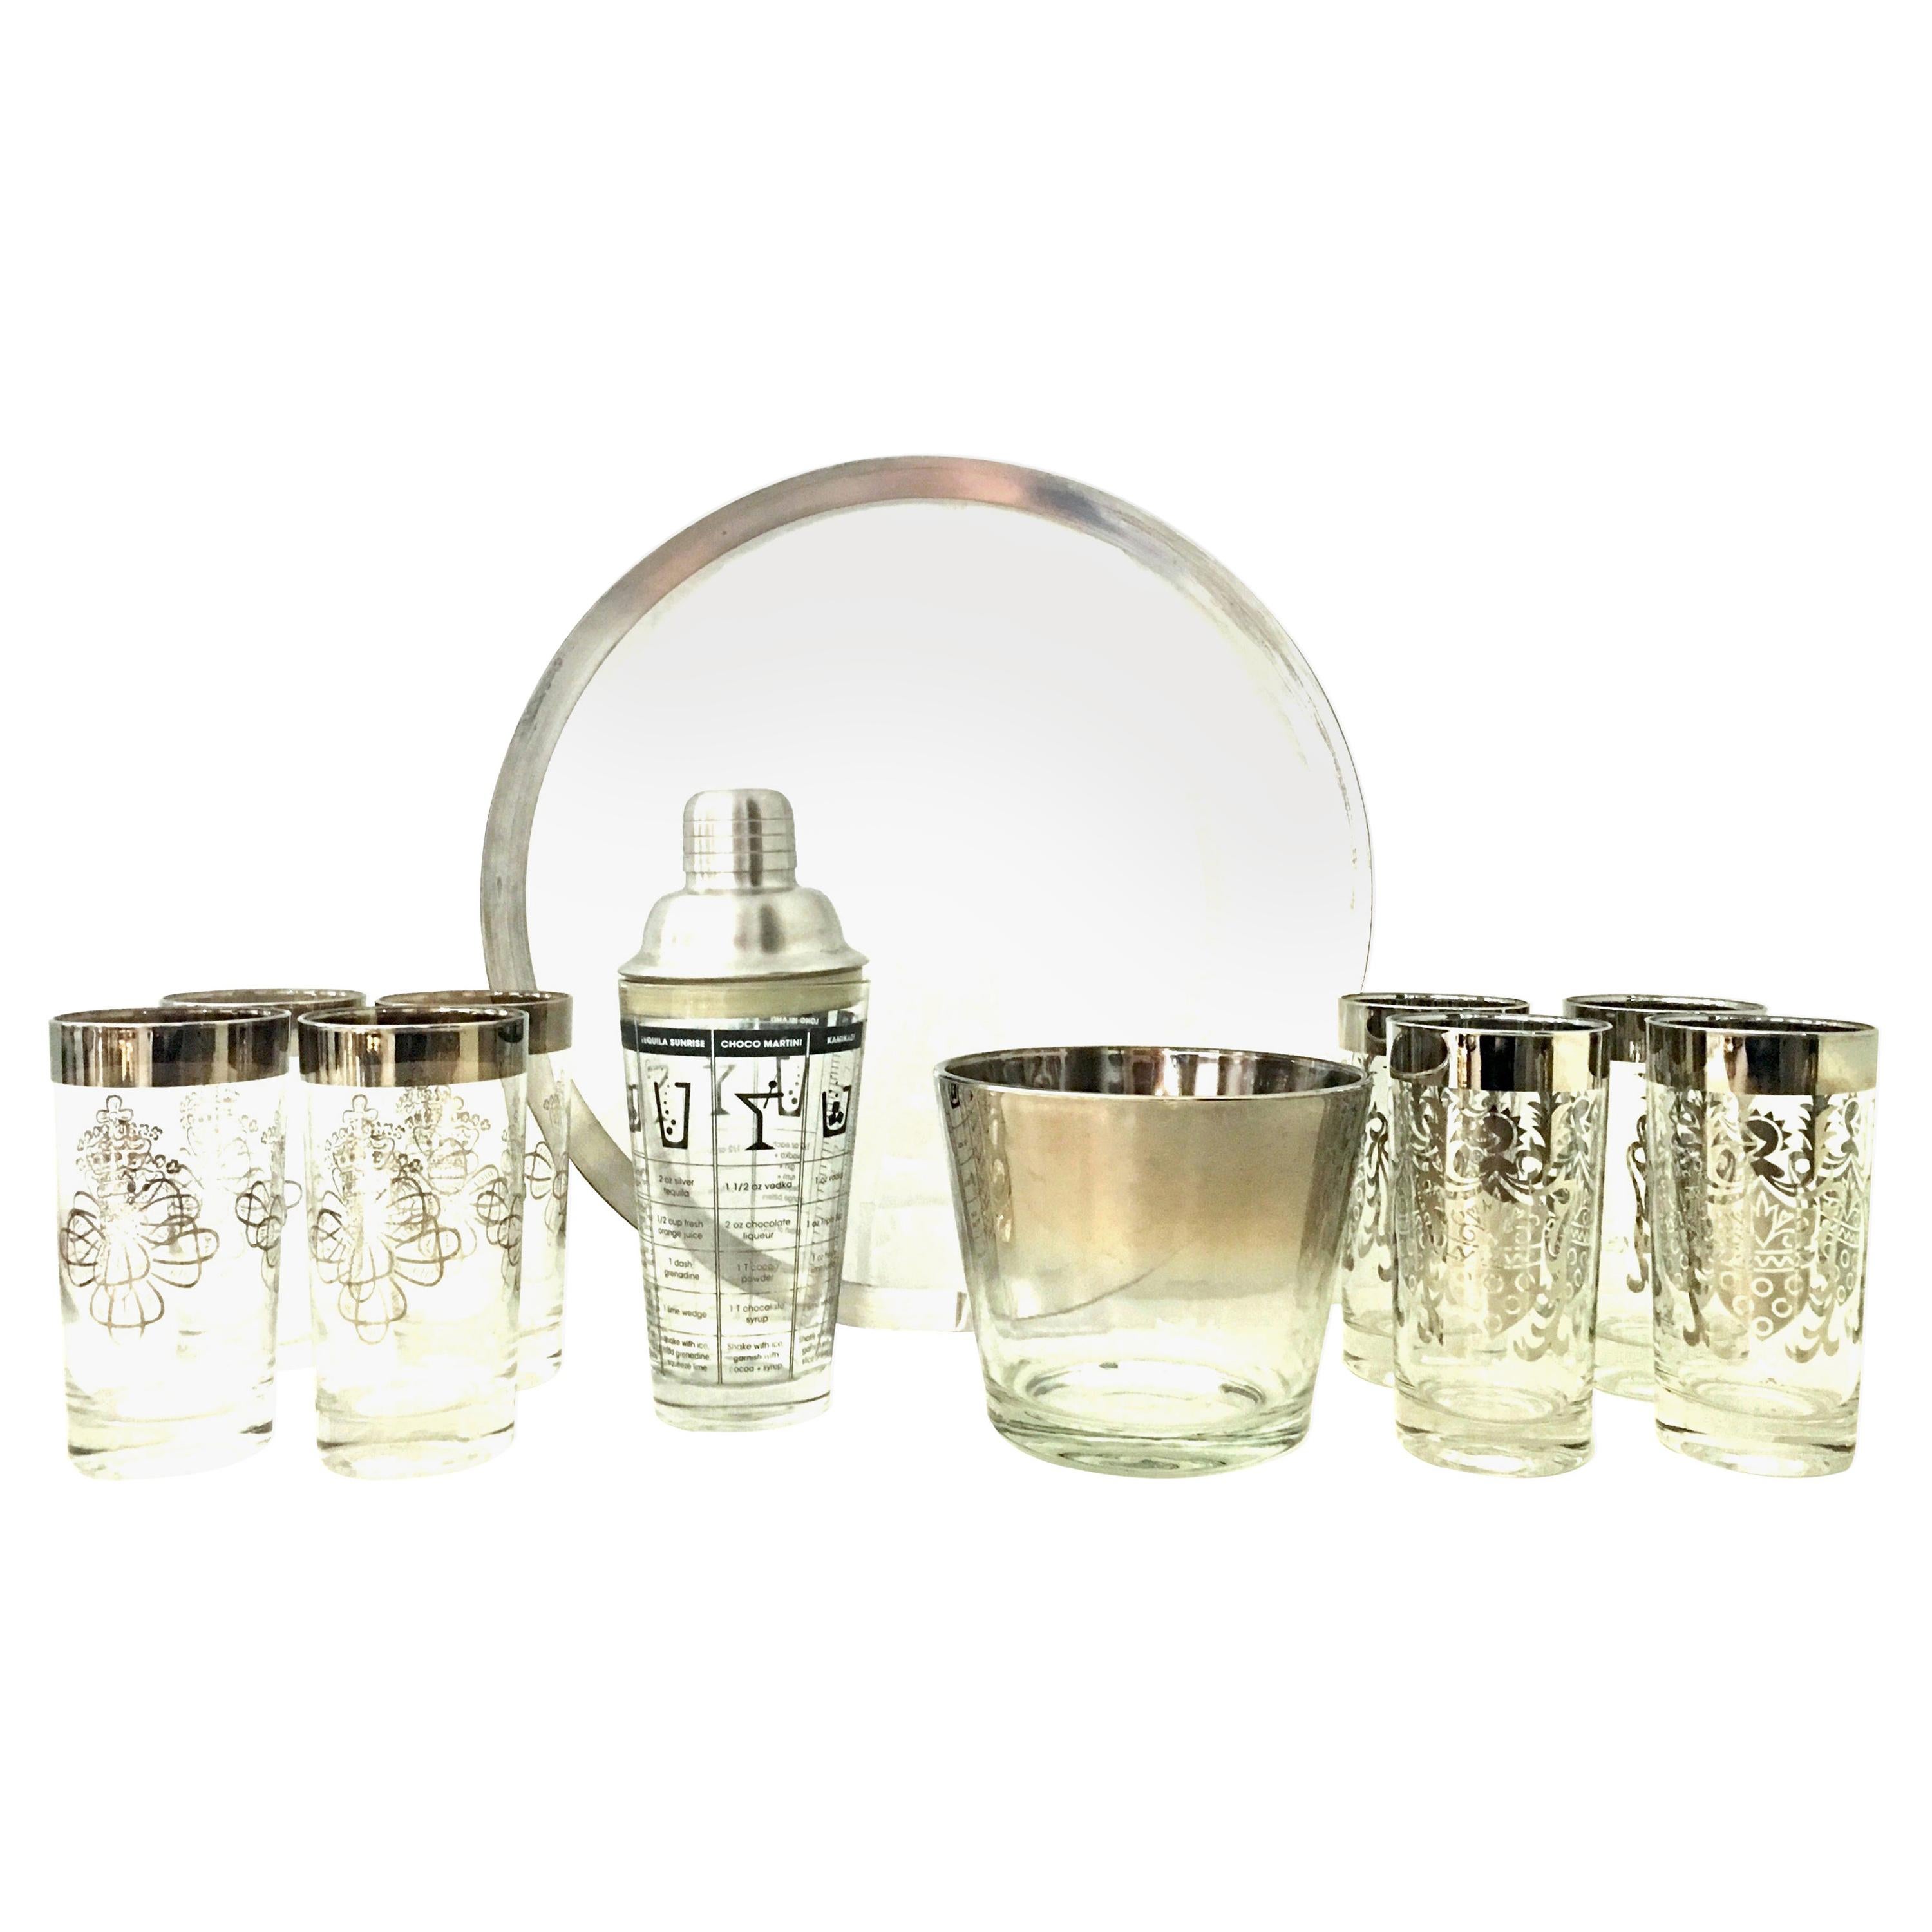 Mid-20th Century Sterling Silver and Glass Drinks Set of 11 by Dorothy Thorpe